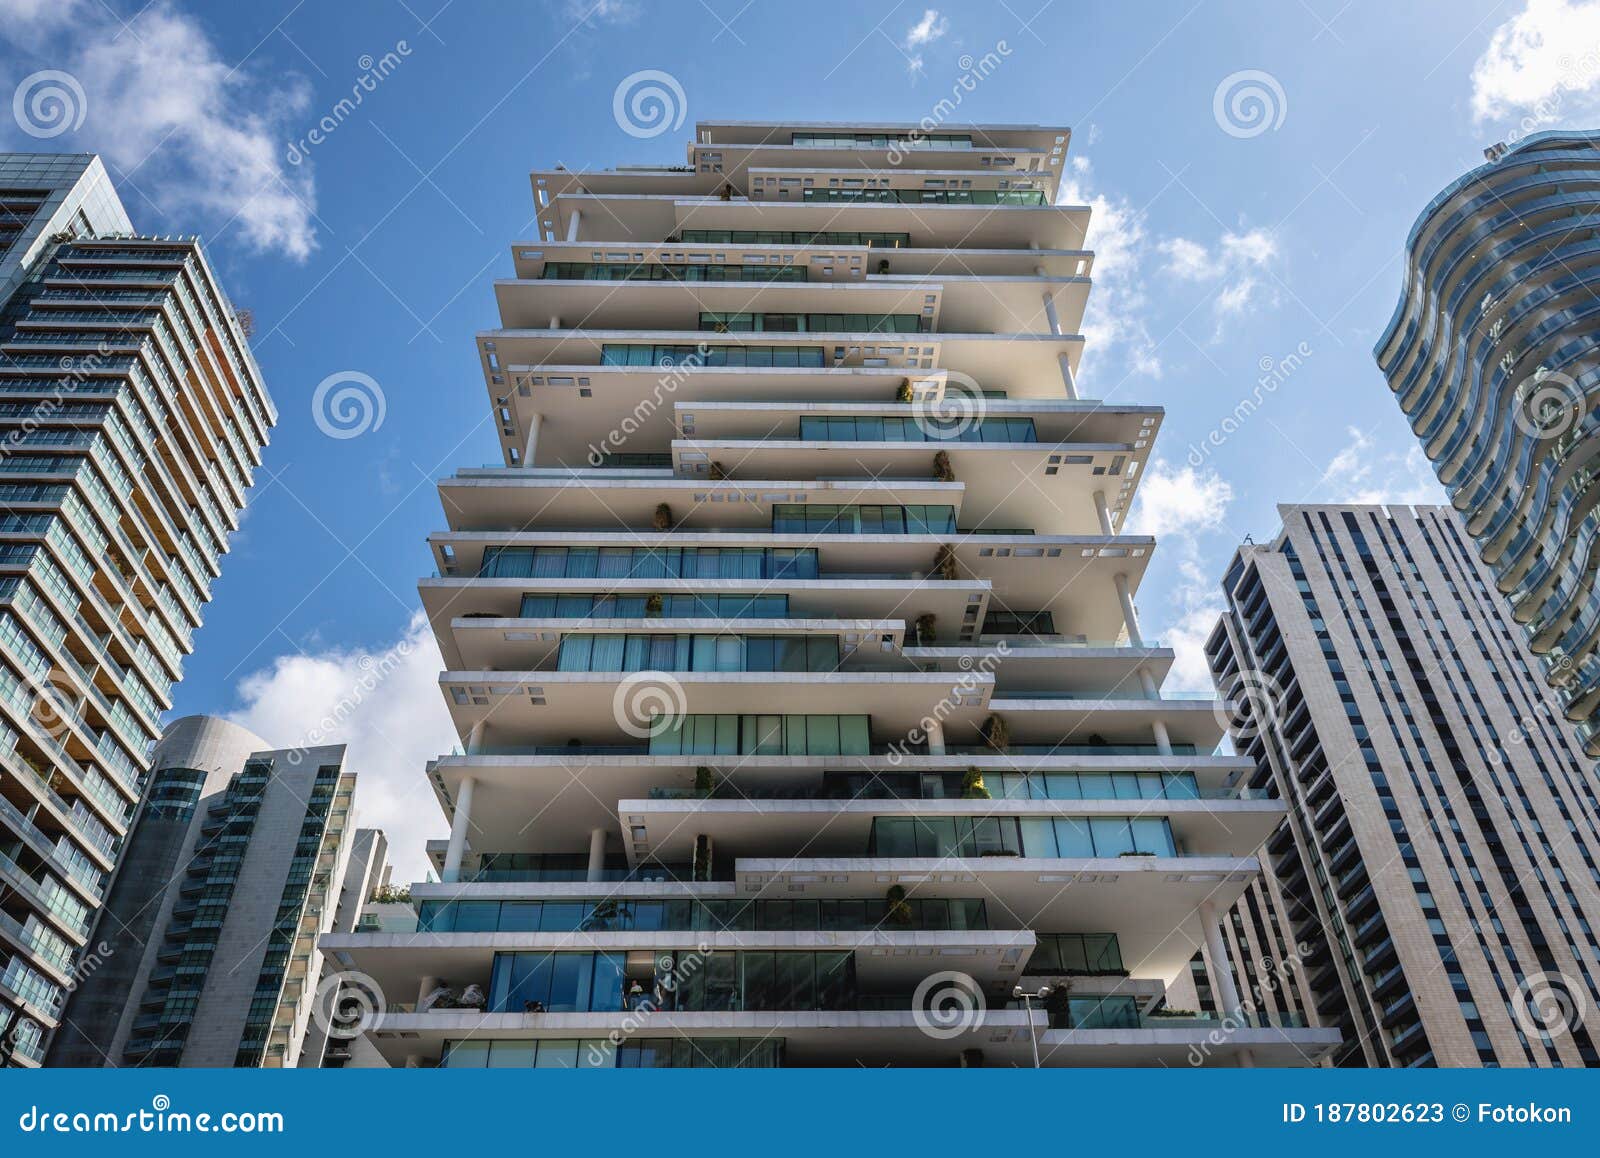 Modern Architecture In Beirut Stock Image Image Of Levantine Arab 187802623